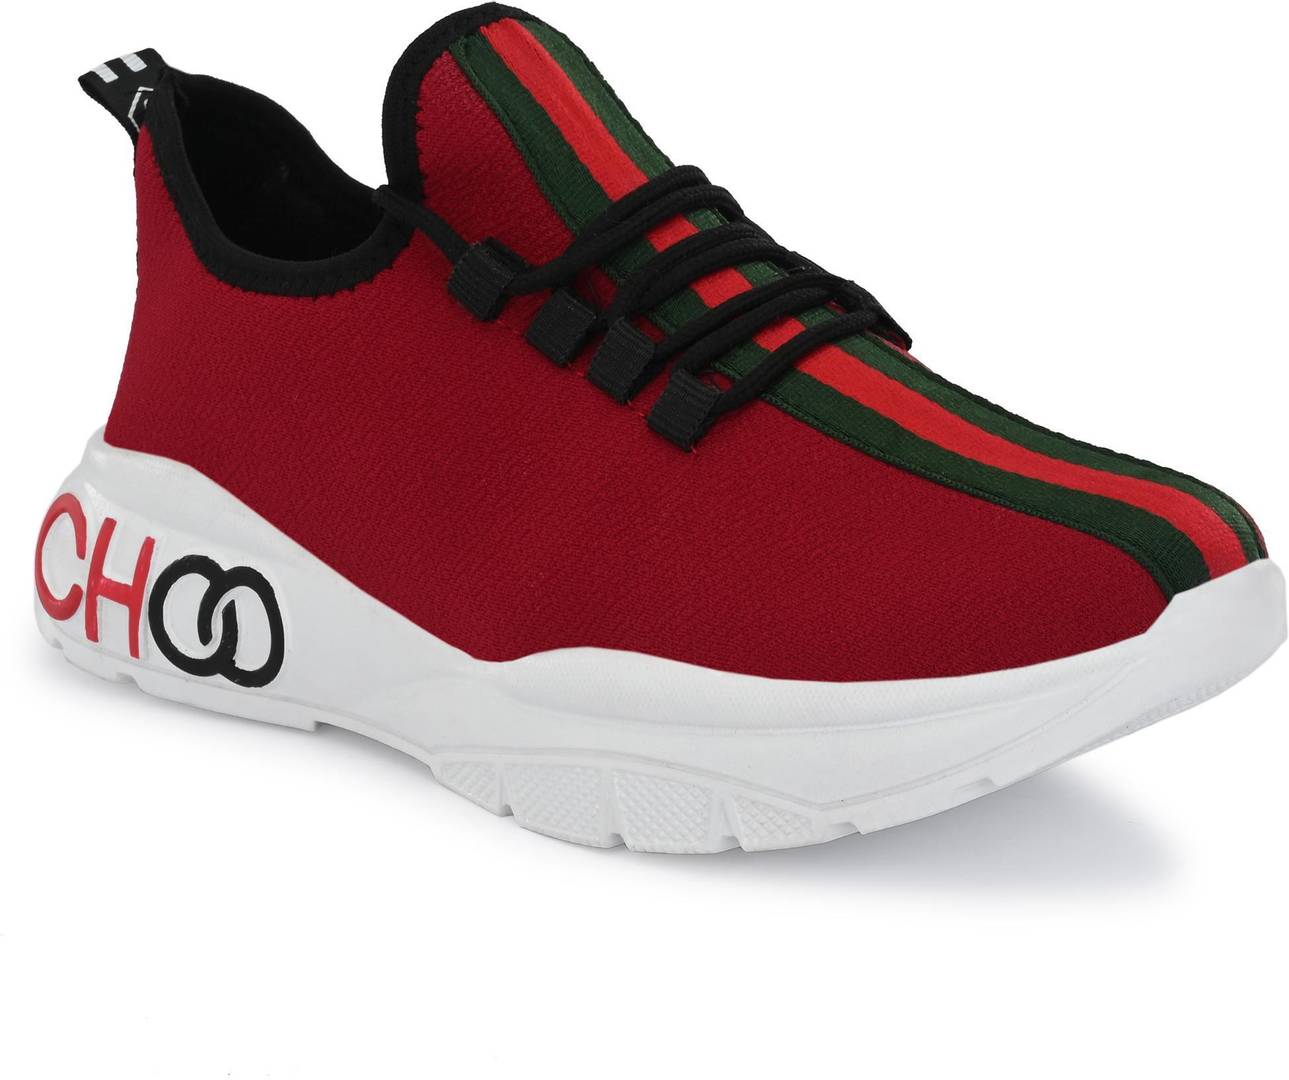 Men's Stylish and Trendy Red Striped Mesh Casual Sneakers